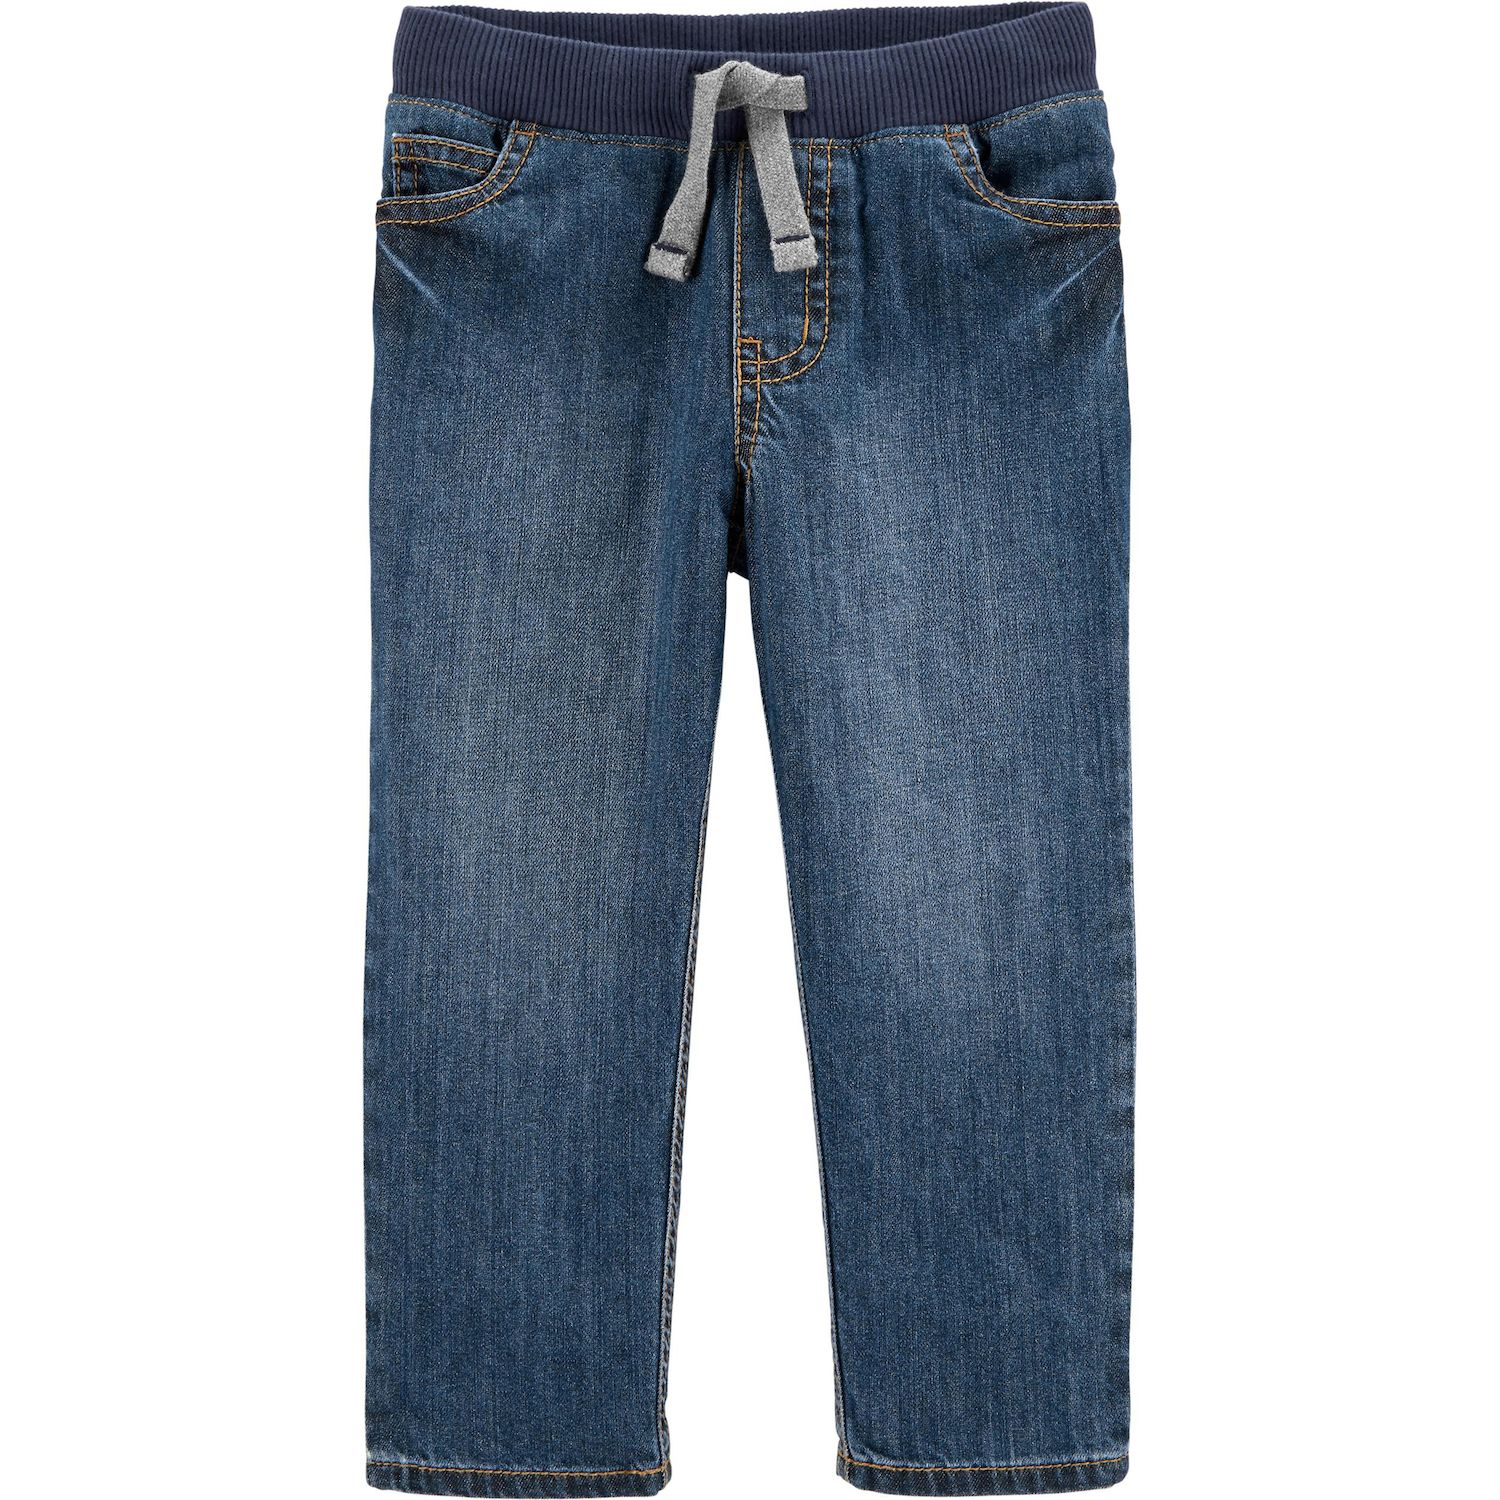 carter's pull on jeans